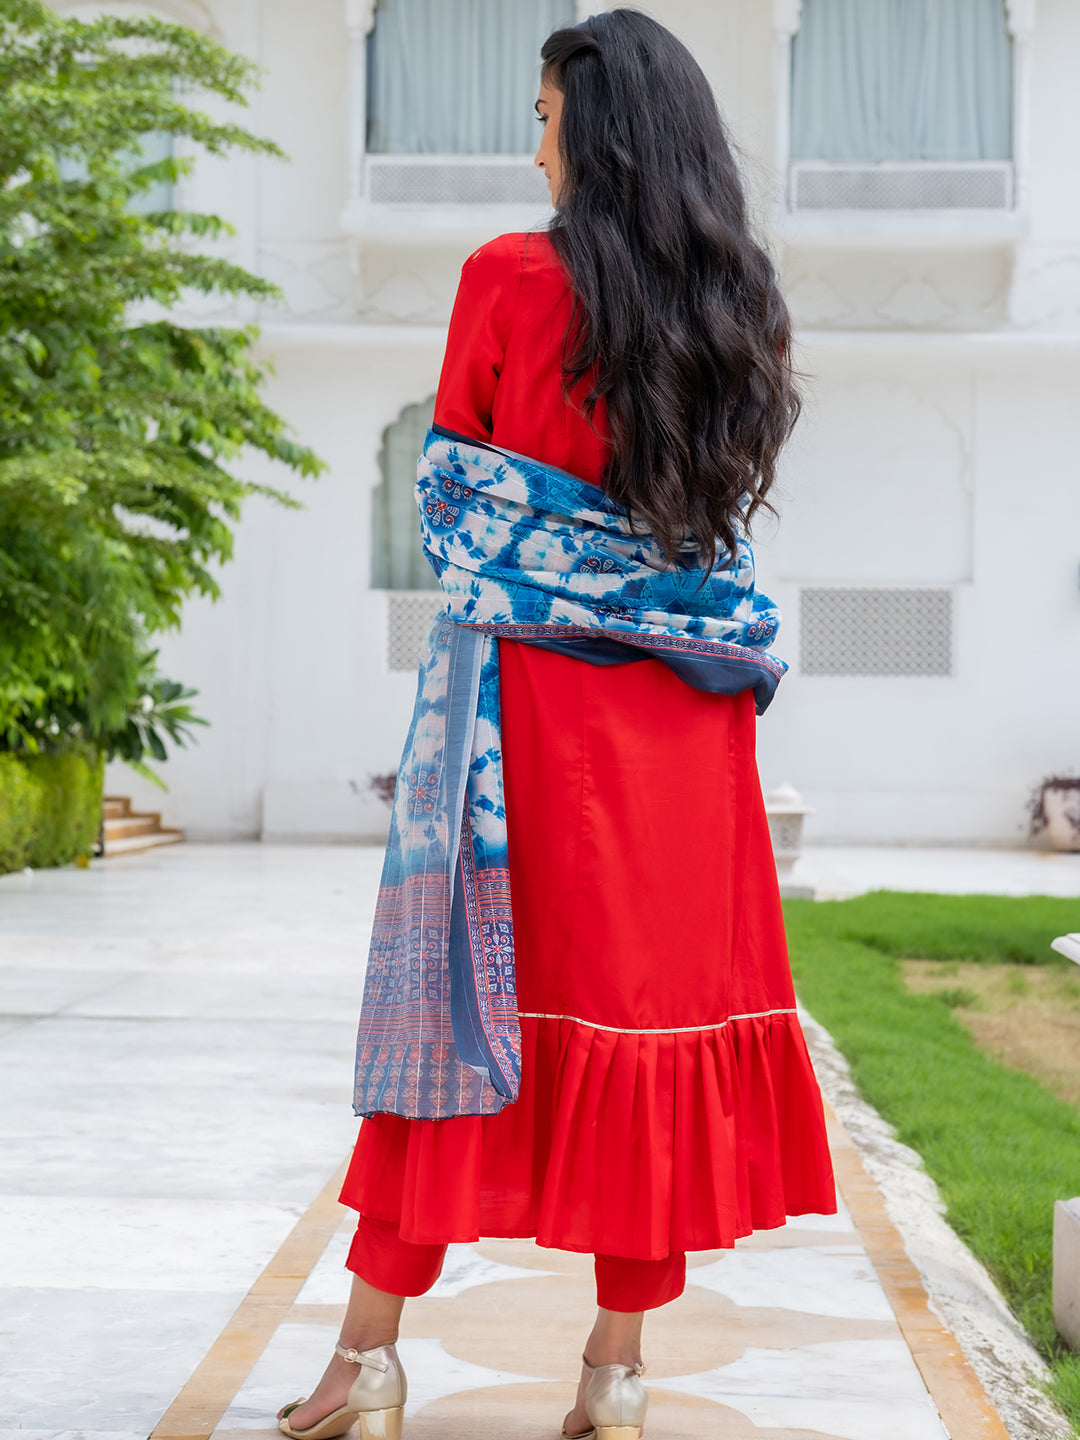 Red Silk Flared Kurta With Pants And Blue Dupatta.